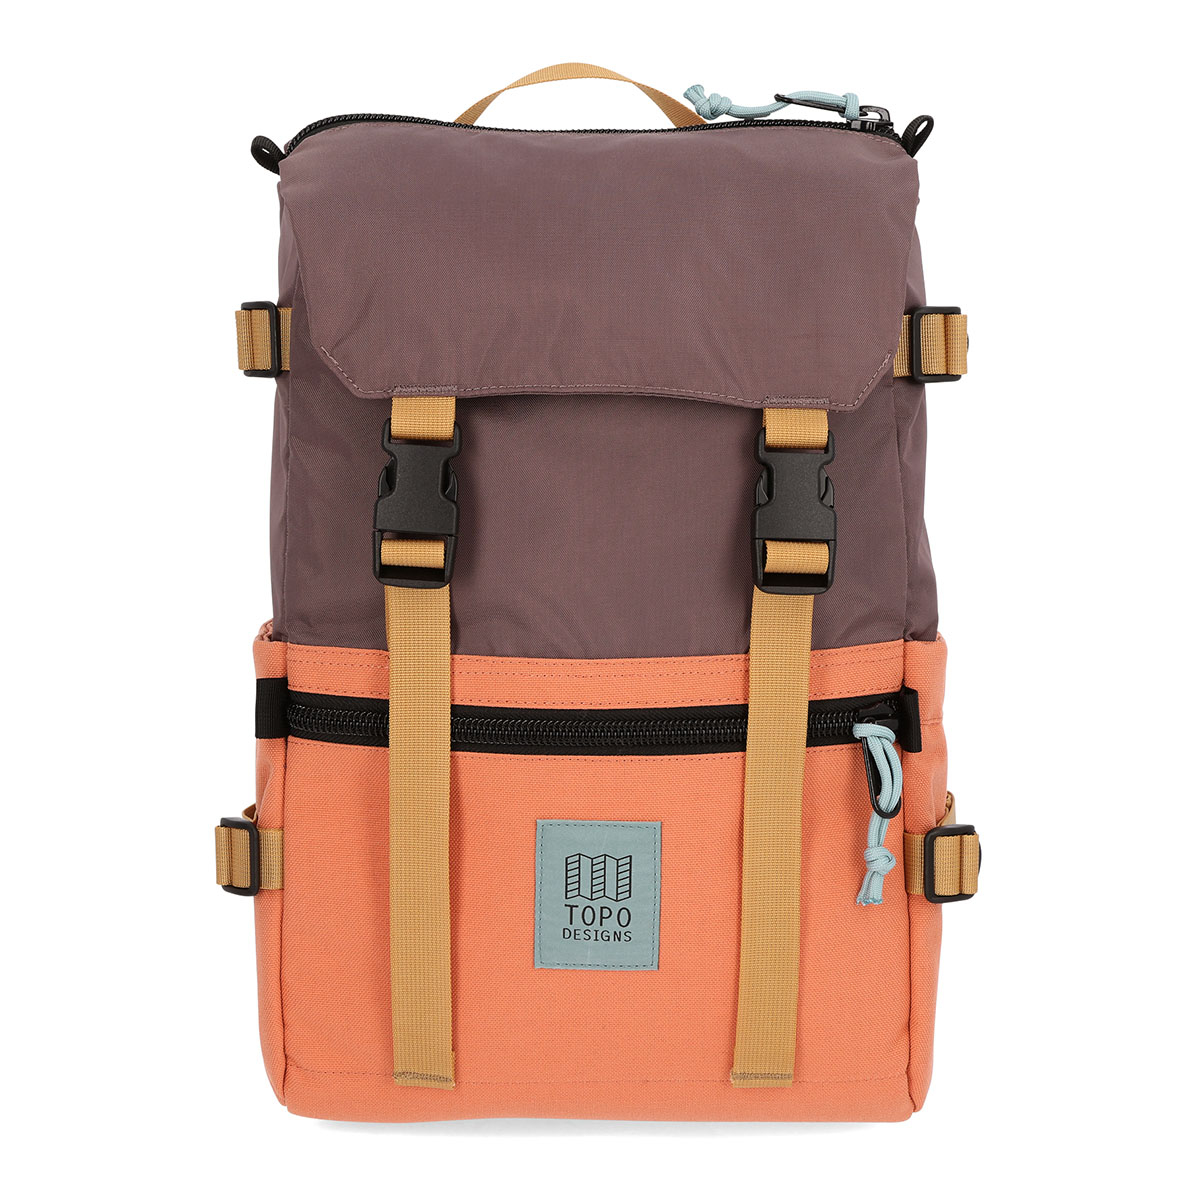 Topo Designs Rover Pack Classic Coral/Peppercorn, timeless backpack with great functionalities